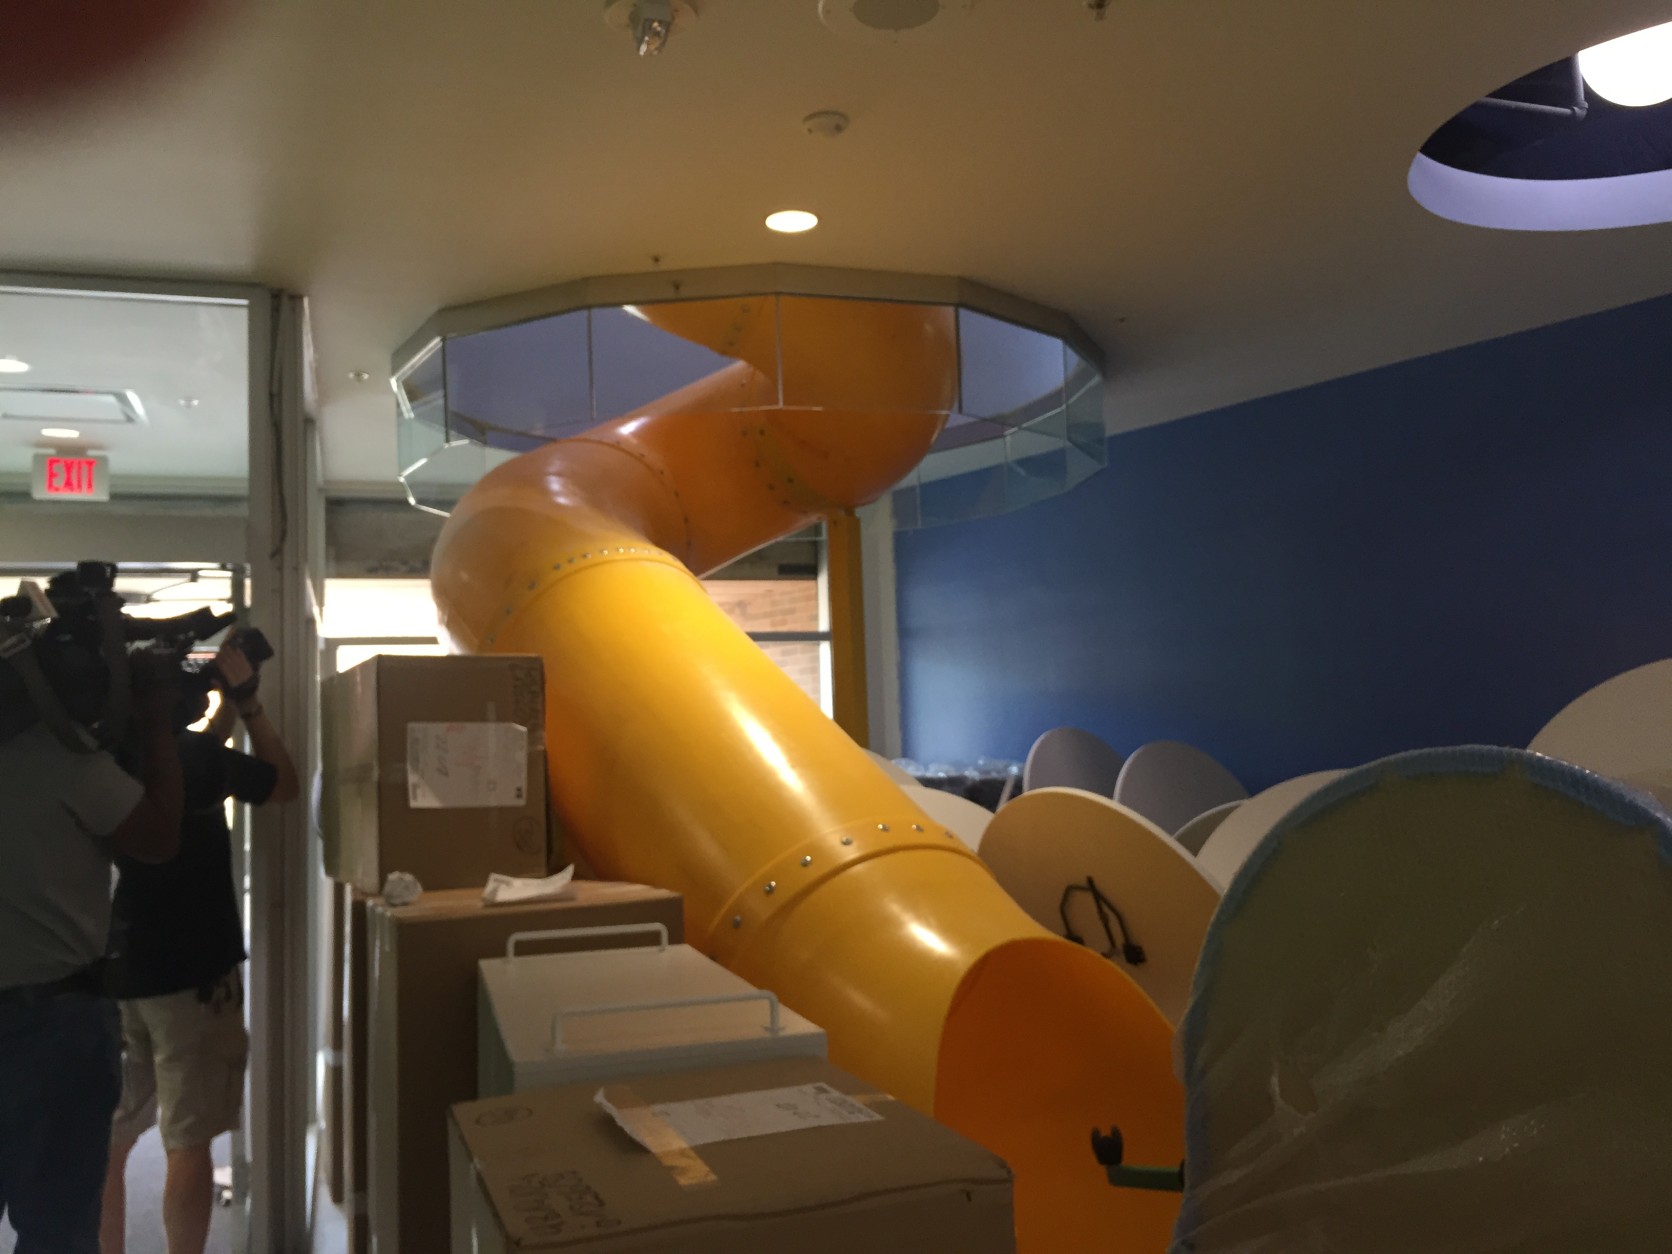 The building only uses the energy it creates, and there’s an indoor slide just for kicks. (WTOP/Max Smith)